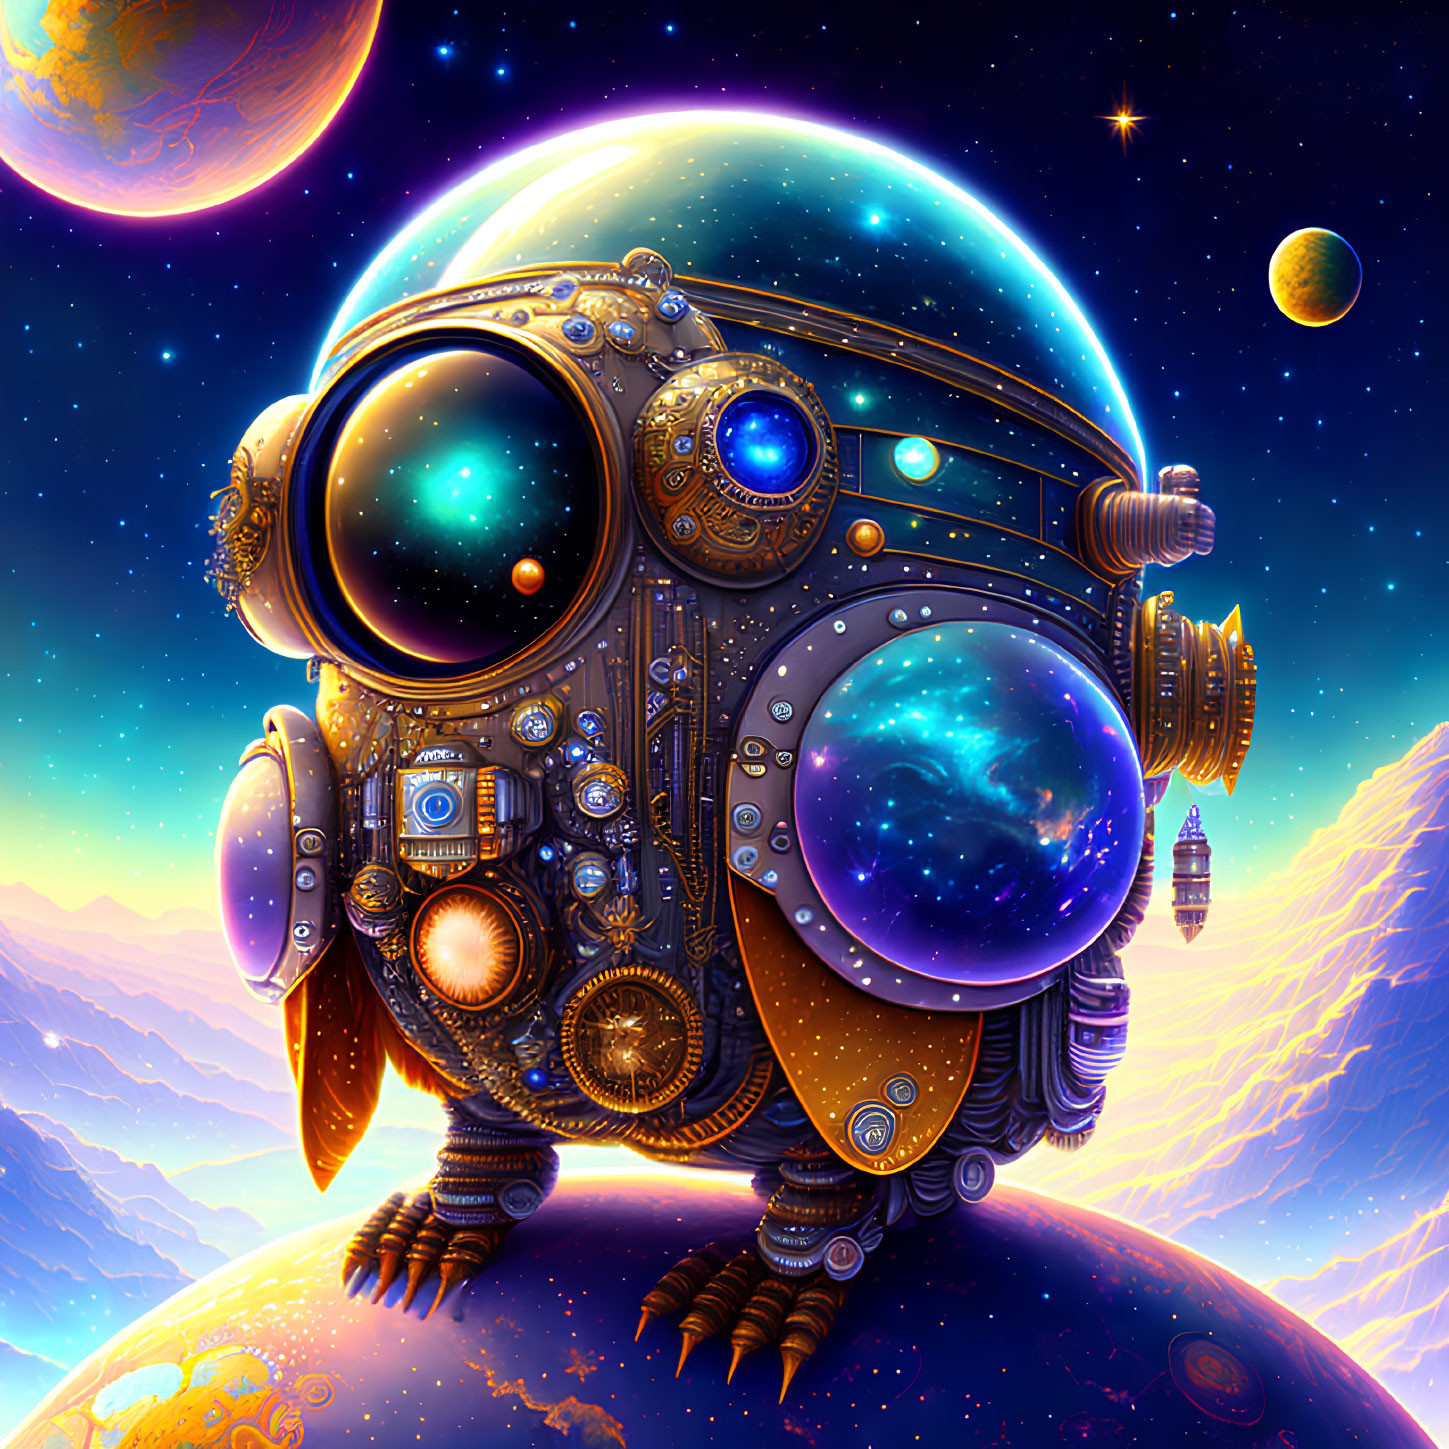 Colorful digital artwork: Astronaut with cosmic reflection in visor amid celestial background